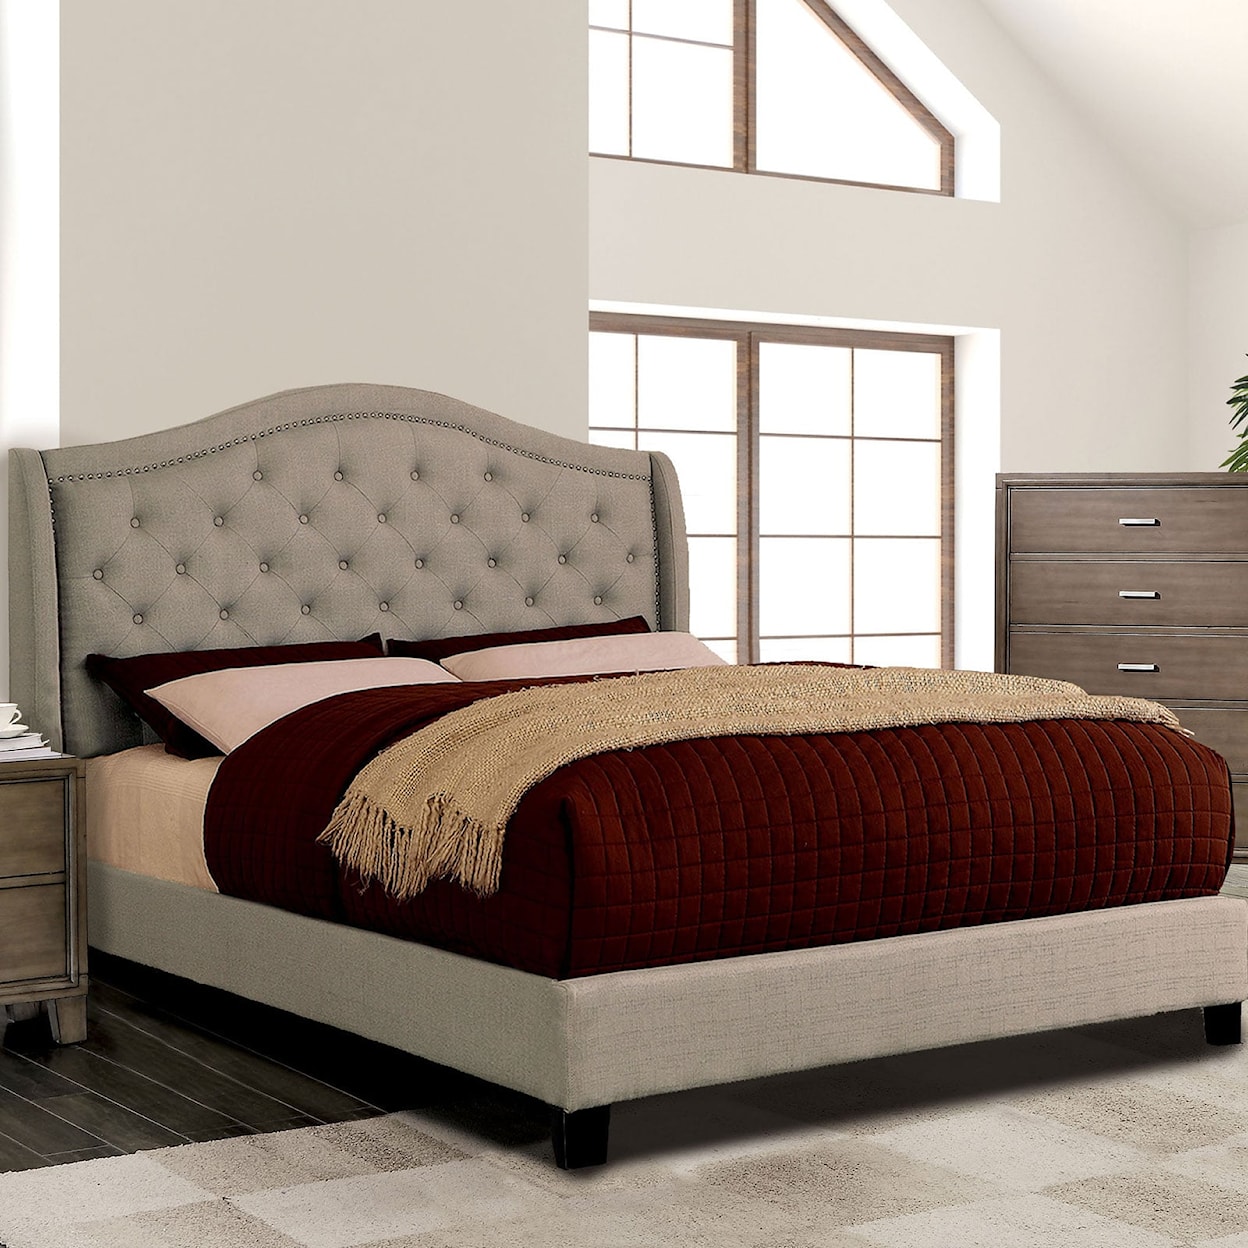 Furniture of America Carly Full Bed, Warm Gray